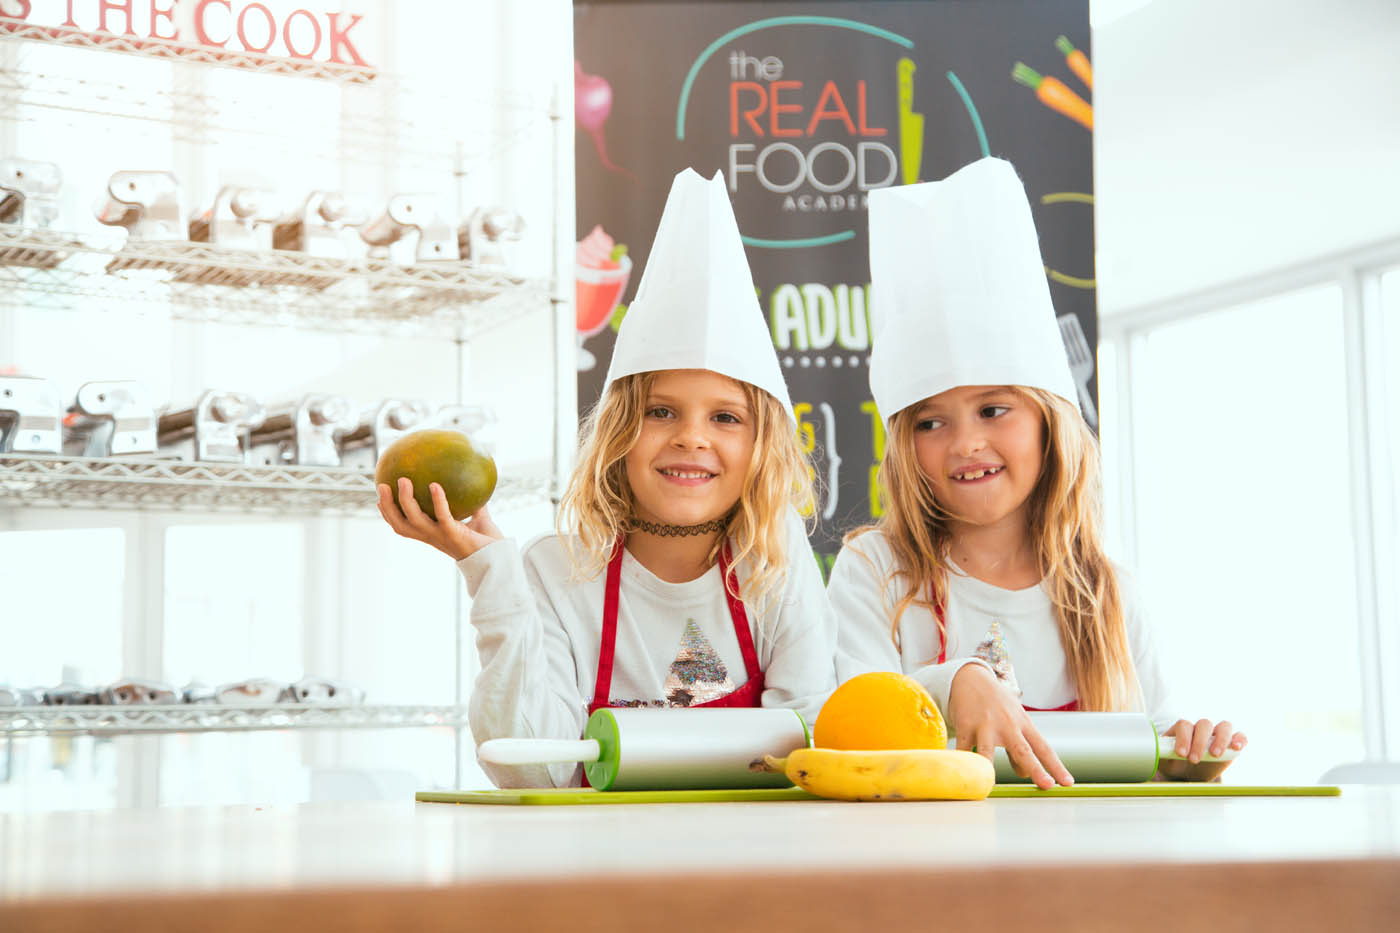 The Real Food Academy - Fun Camps for Summer. The Real Food Academy